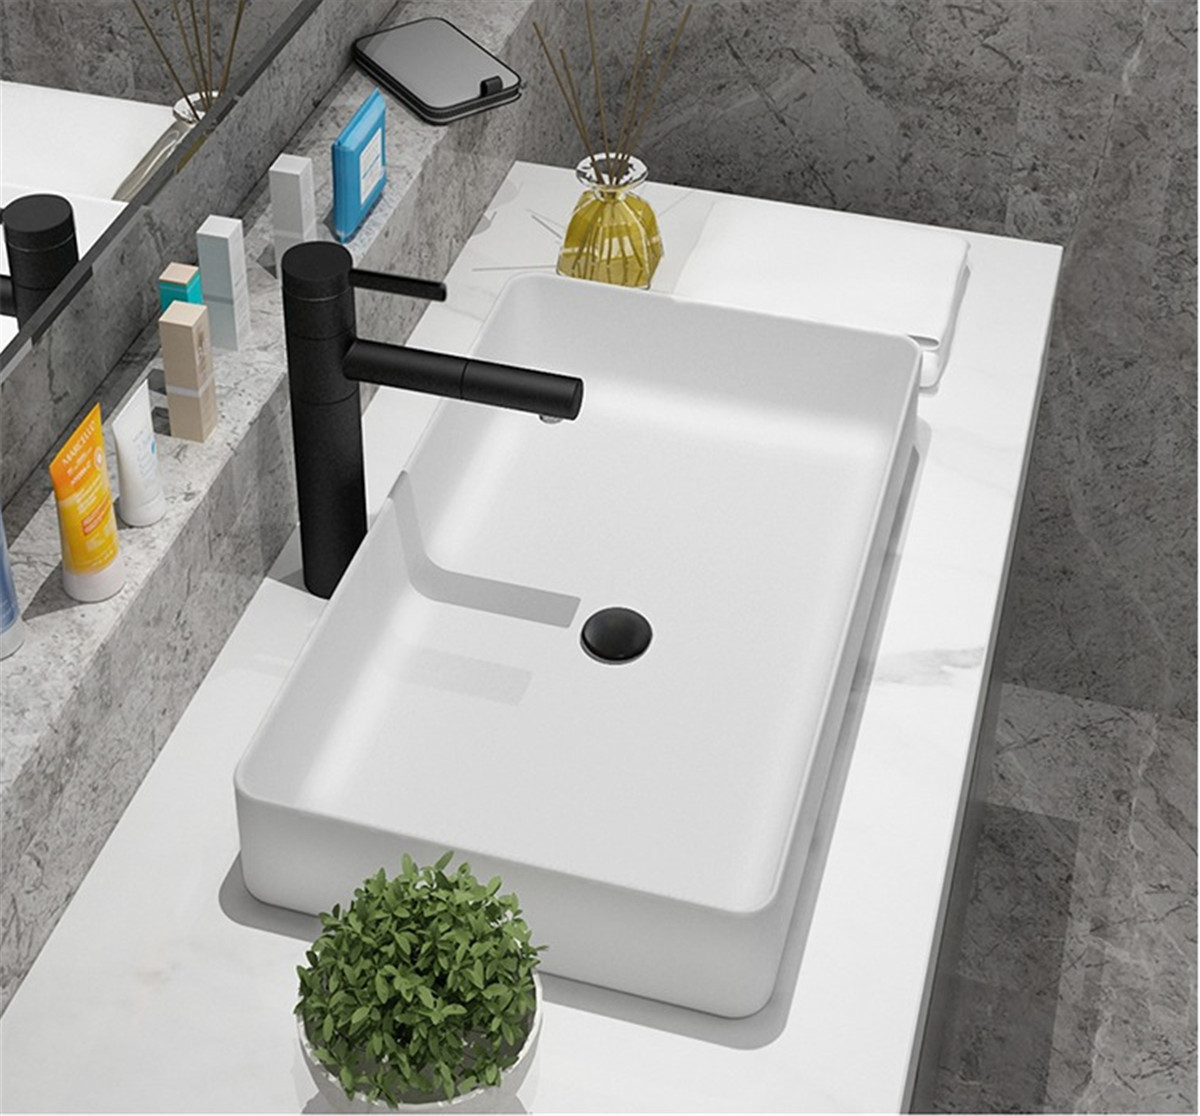 Ceramics counter top wash sinks in Pure White Color RECTANGULAR SHAPE apply for home decor